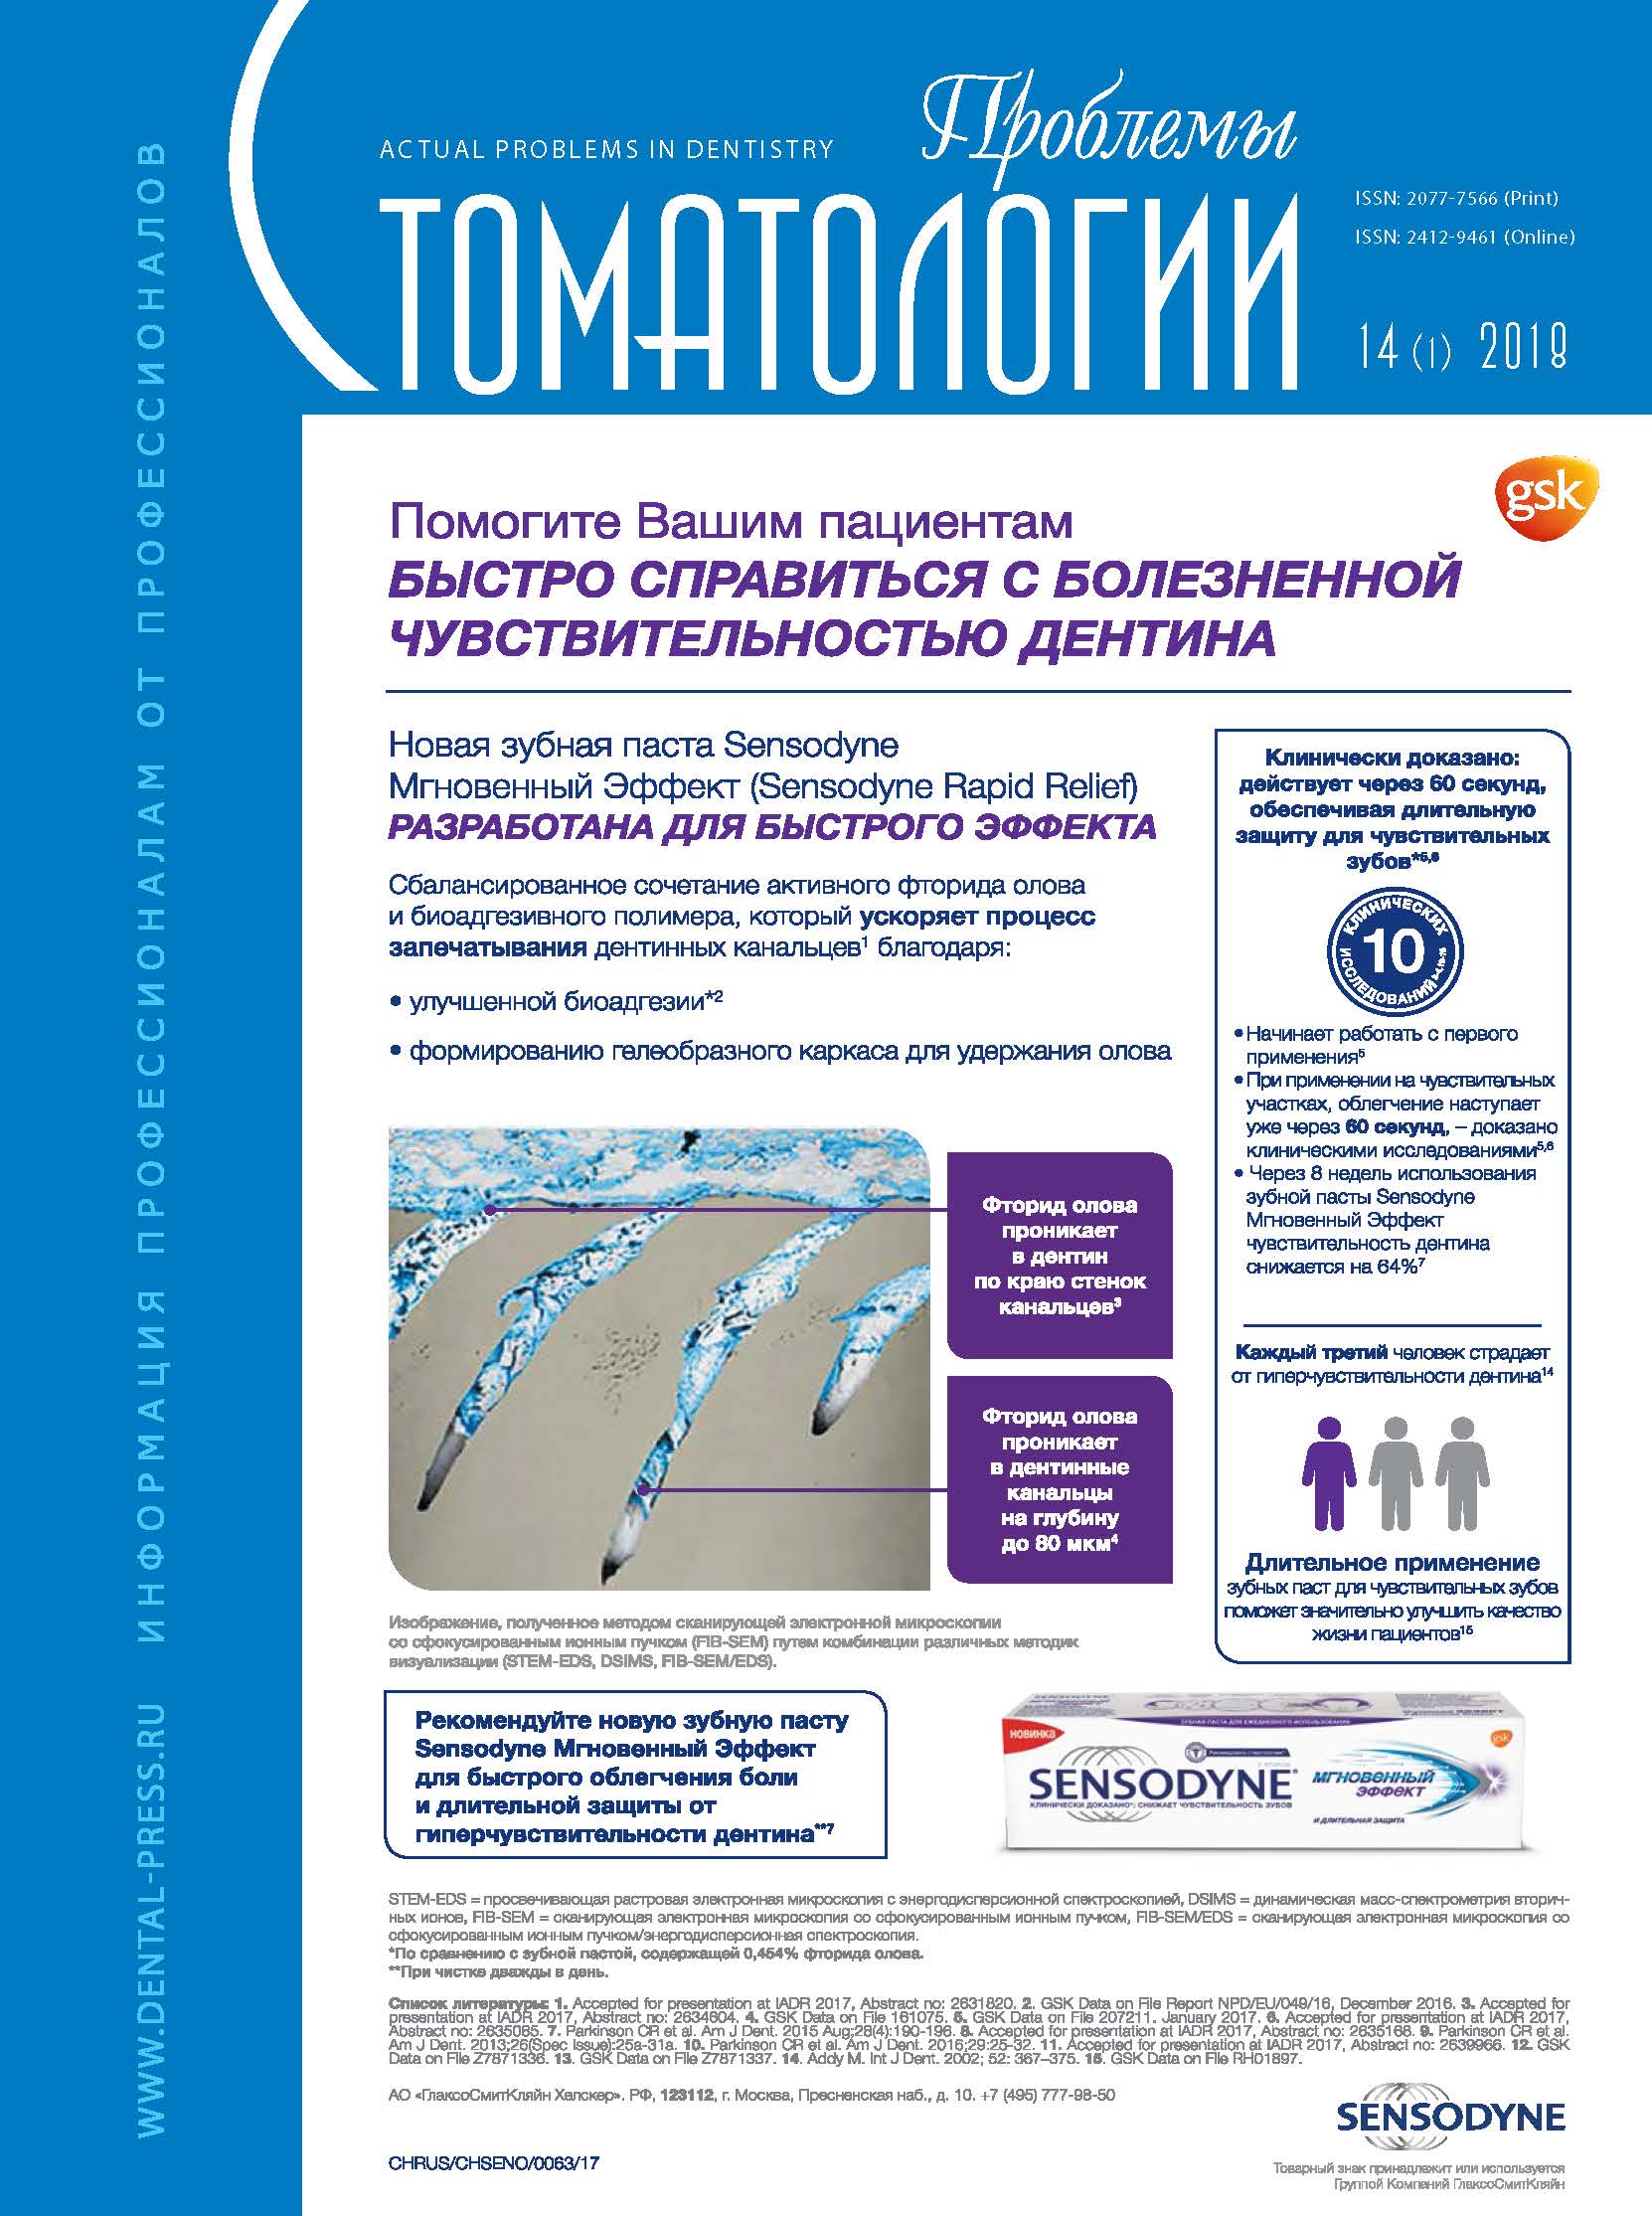                         A NON-STANDARD INTERVIEW OF STUDENTS OF THE DENTISTRY FACULTY OF URAL STATE MEDICAL UNIVERSITY DEDICATED TO KEY MOMENTS OF PROFESSIONAL ORIENTATION
            